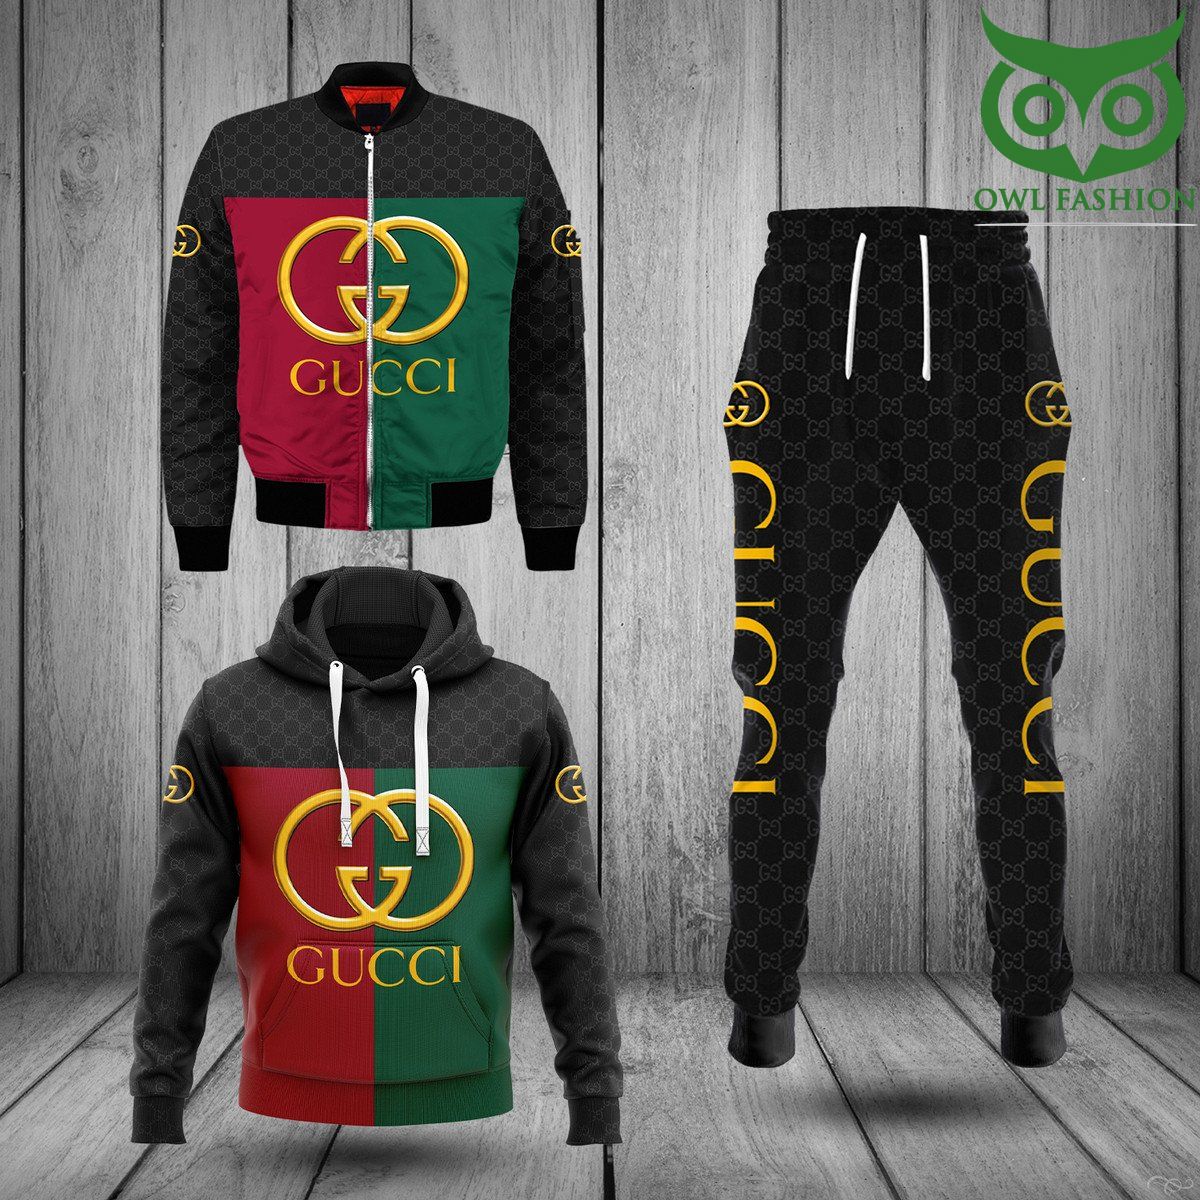 Gucci big golden logo red green Fashion Bomber Jacket Hoodie and Pants 